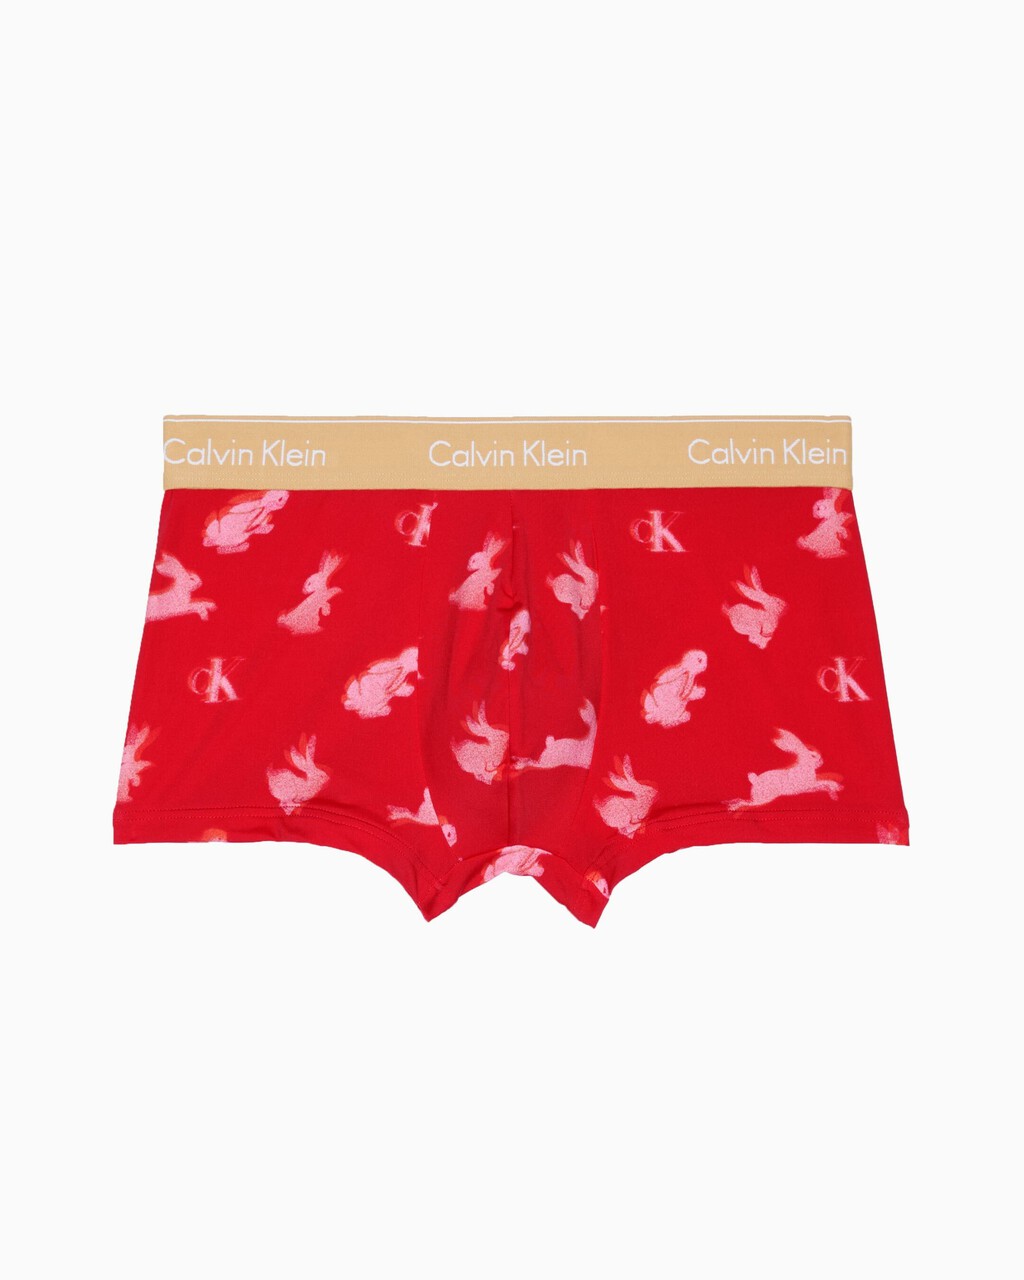 All Over Print Low Rise Trunks, LNY RABBIT PRINT+FLAME SCARLET, hi-res